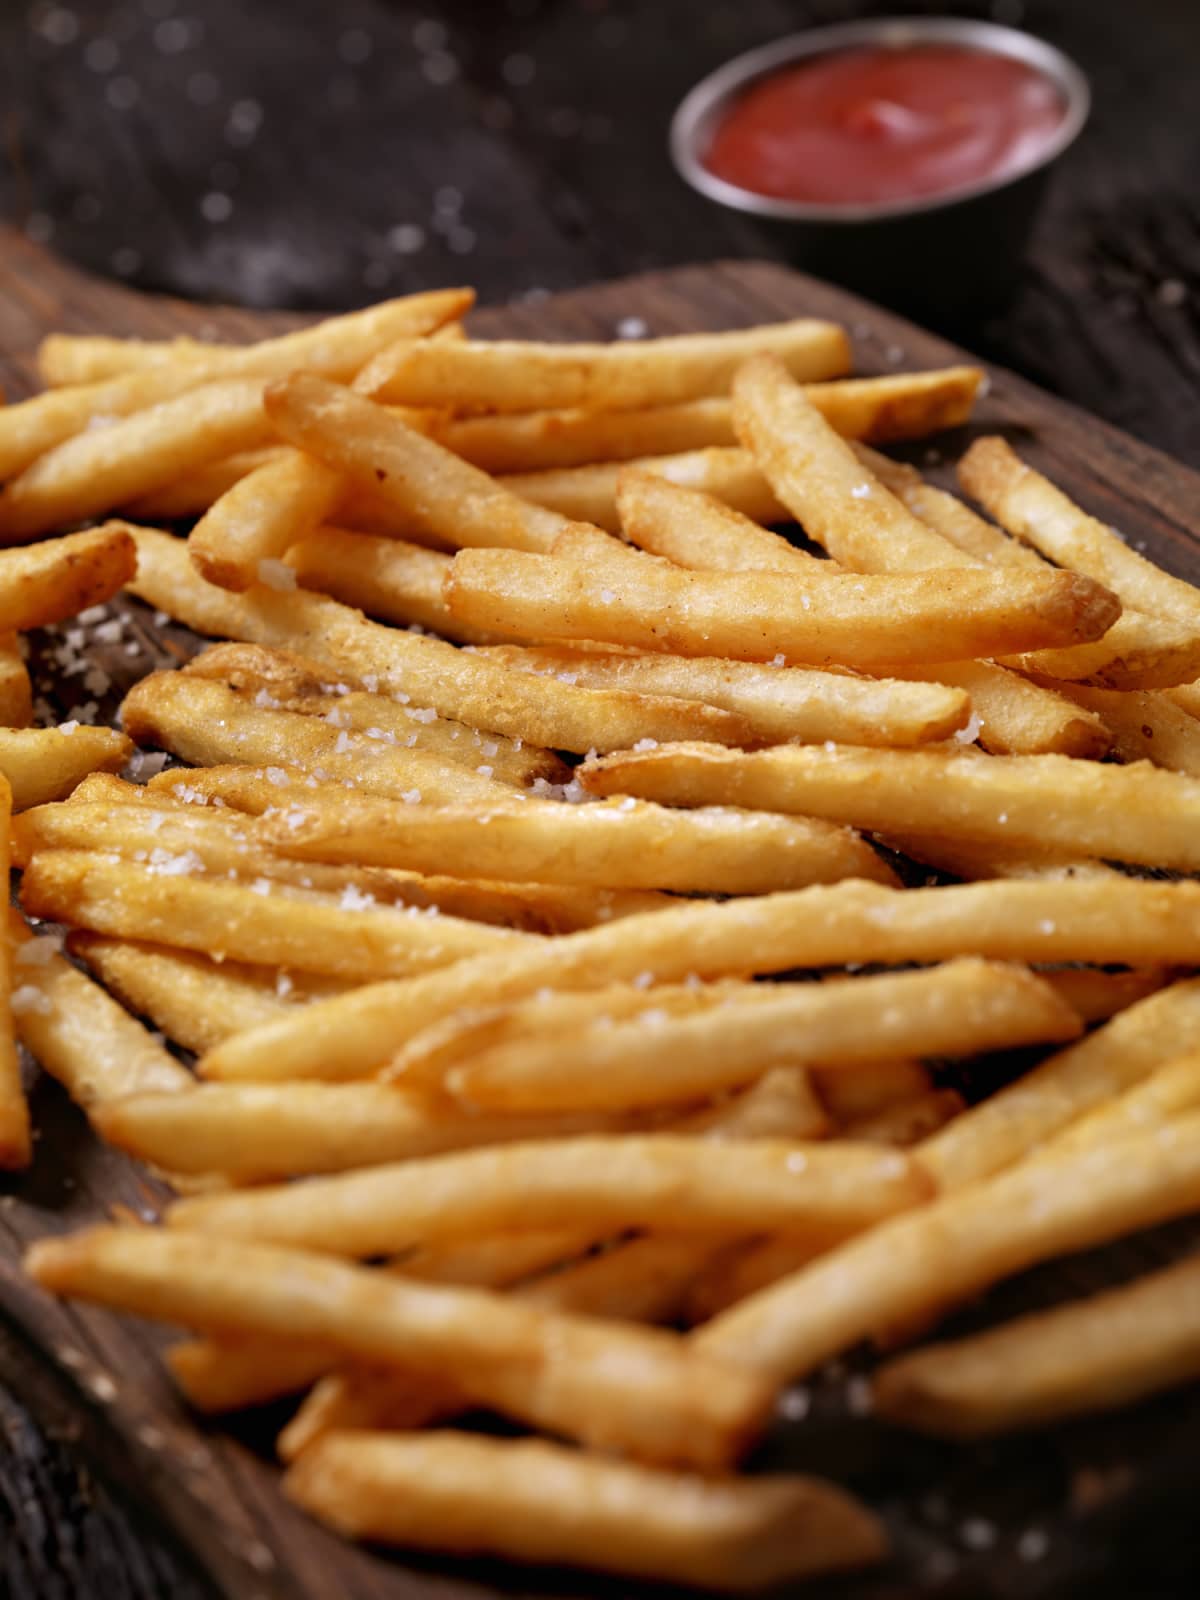 Sea Salt French Fries with Ketchup  - Photographed on Hasselblad H3D2-39mb Camera